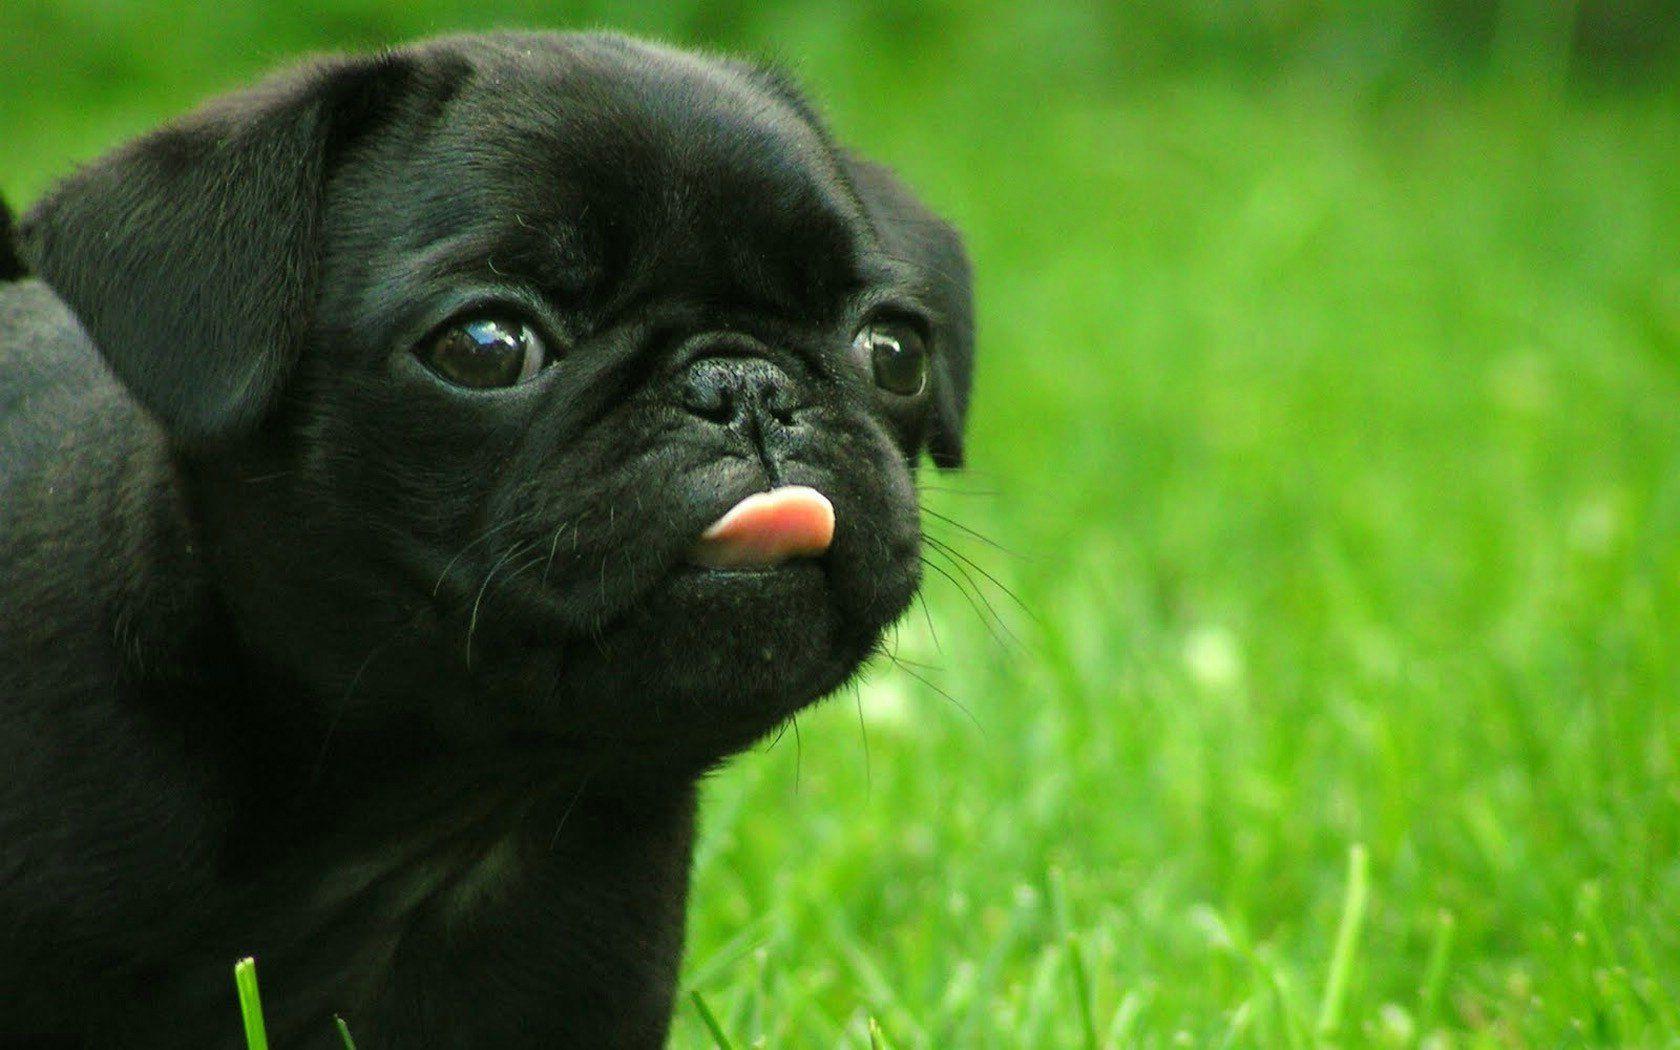 Pug Dog Hd Wallpapers For Laptop Wallpaper Cave